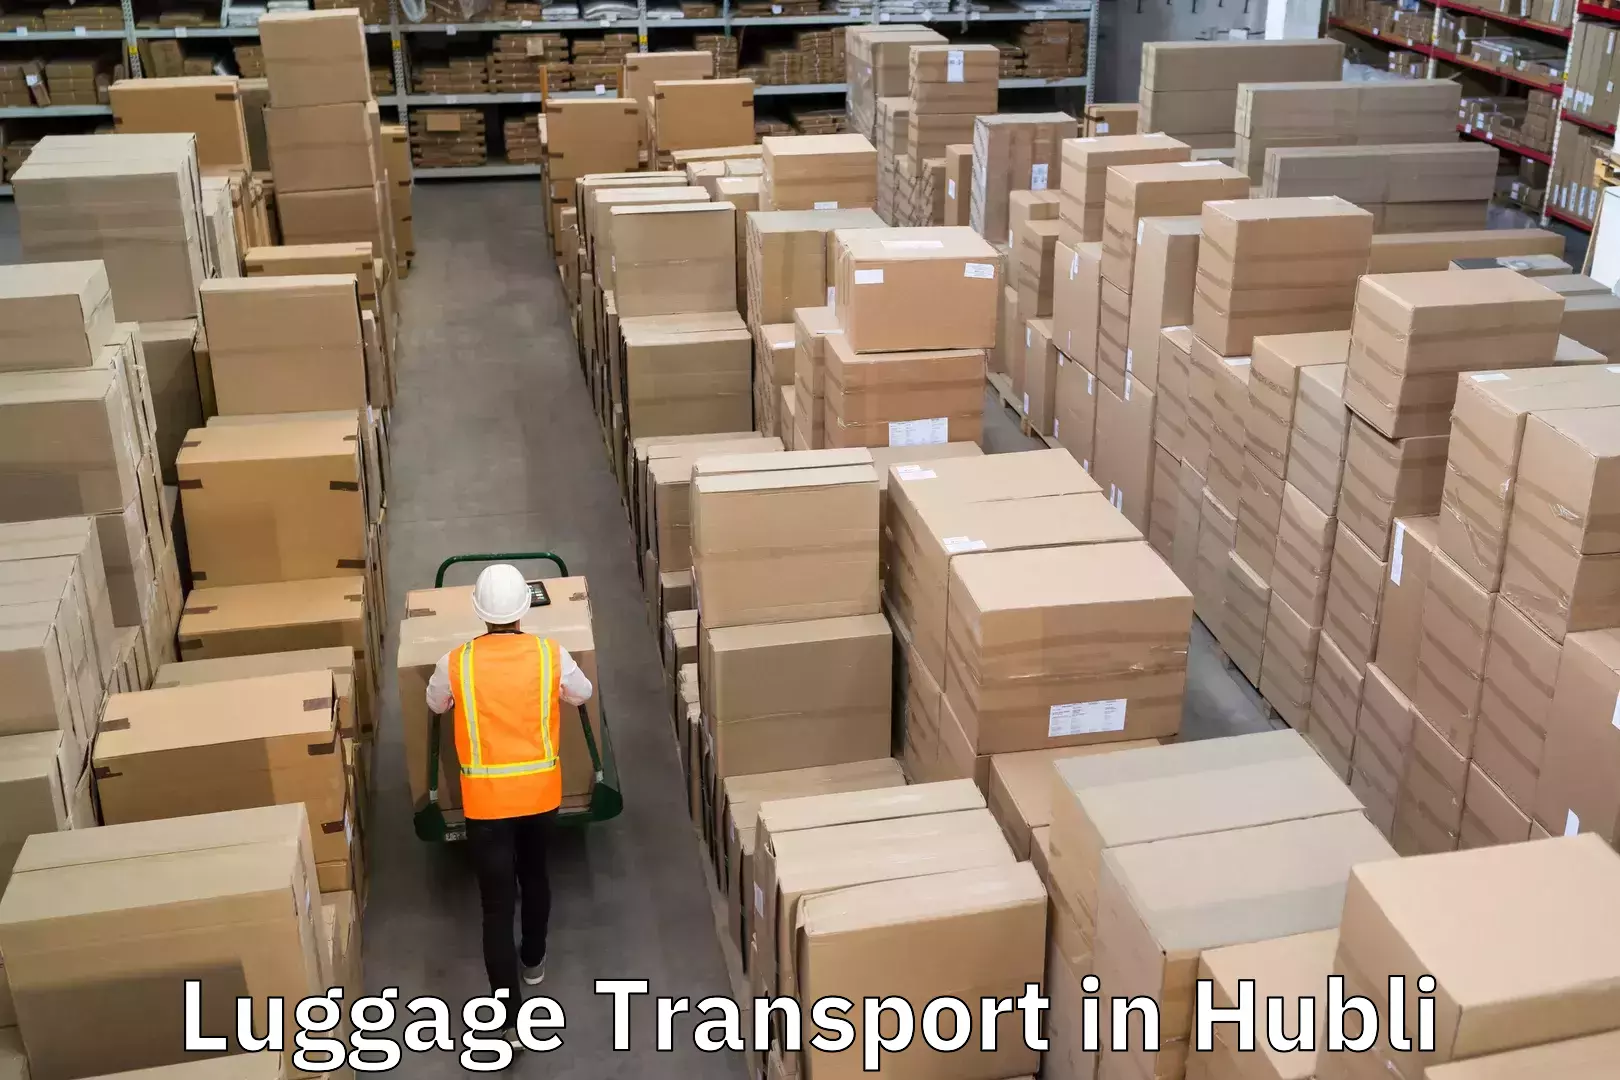 Express luggage delivery in Hubli